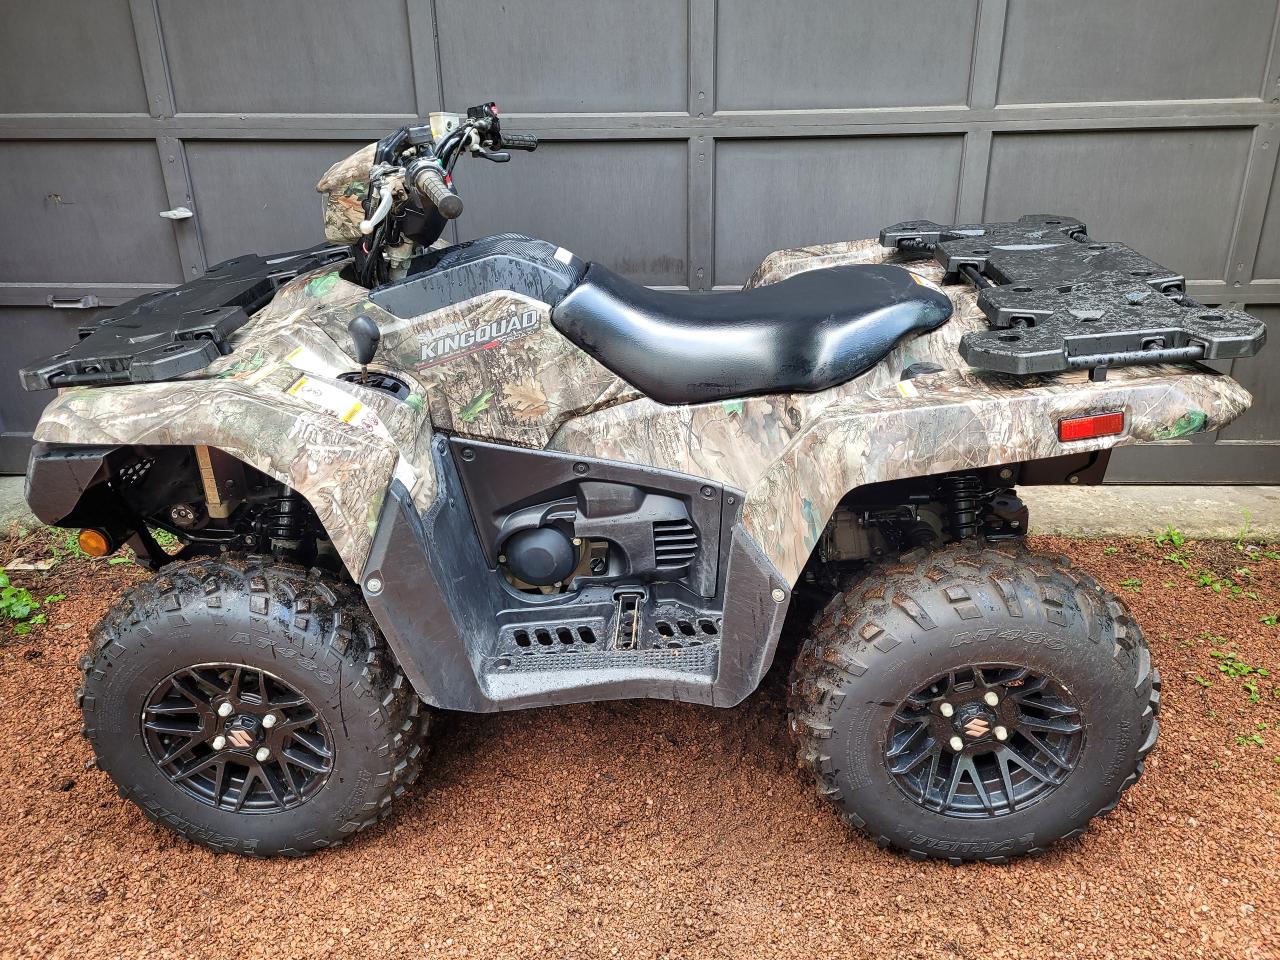 2022 Suzuki KingQuad 750AXi  EPS *1-Owner* Financing Available Trade-in Welcome - Photo #1